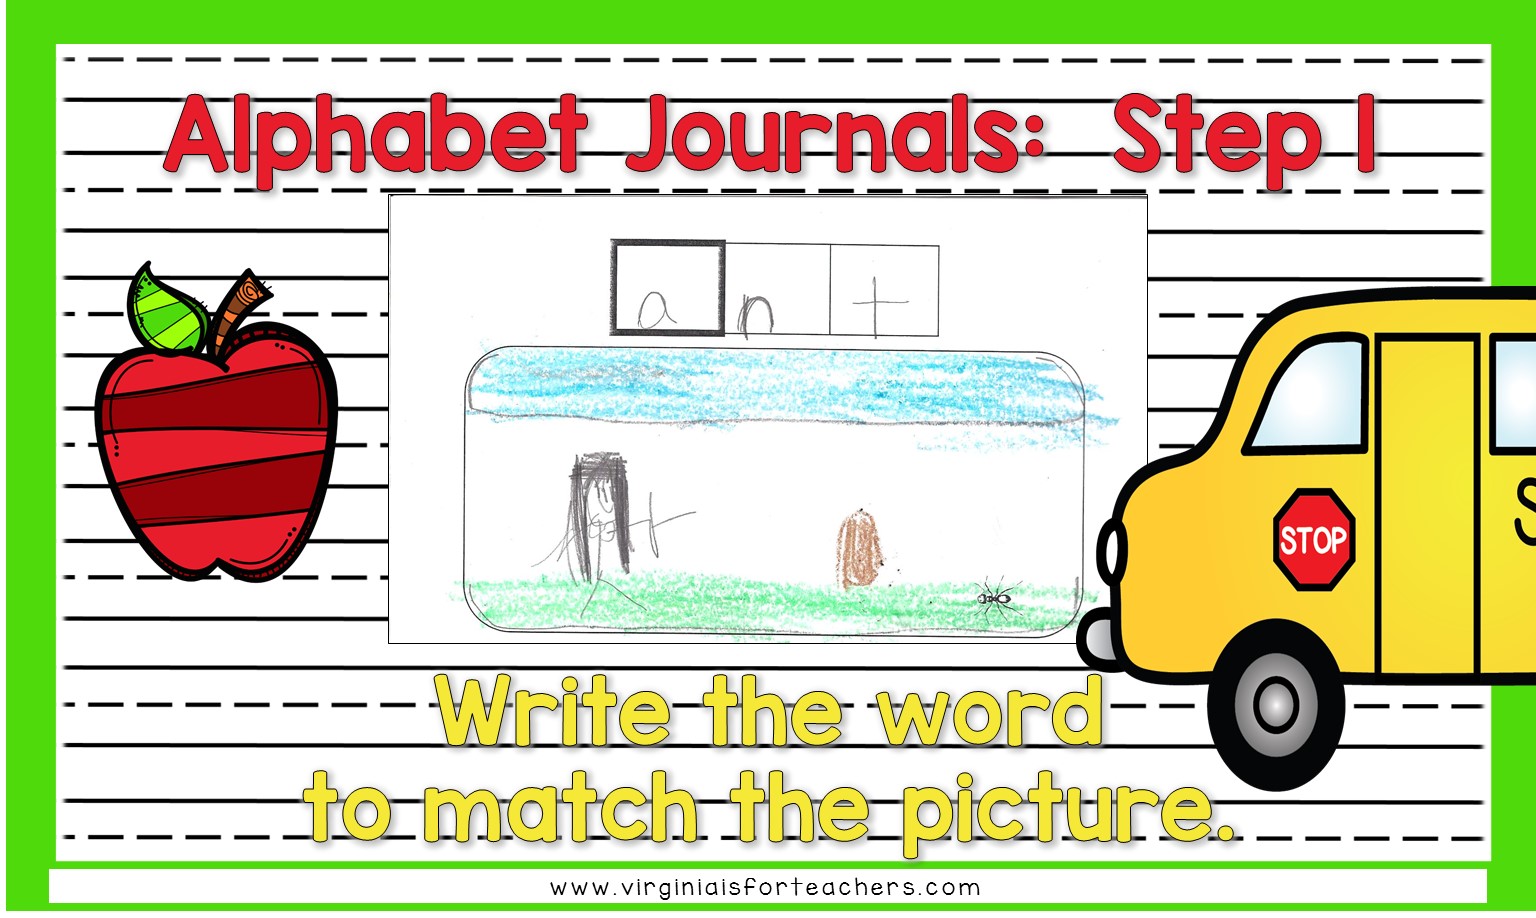 Writing can be challenging at the beginning of first grade. These journals can help students decode, create, and illustrate.